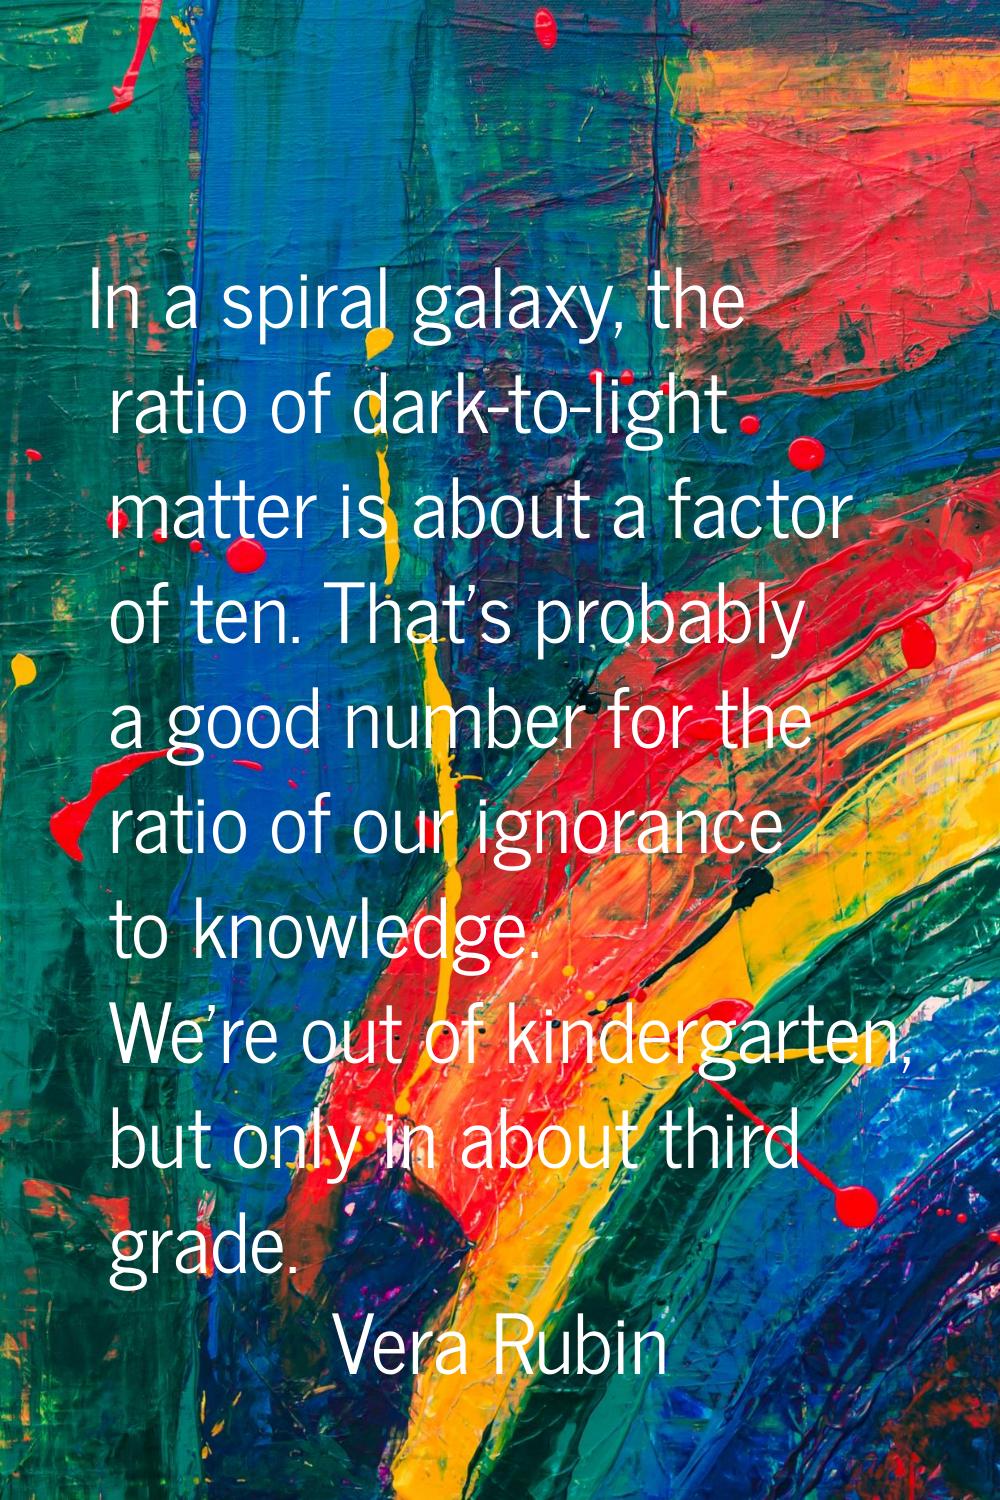 In a spiral galaxy, the ratio of dark-to-light matter is about a factor of ten. That's probably a g